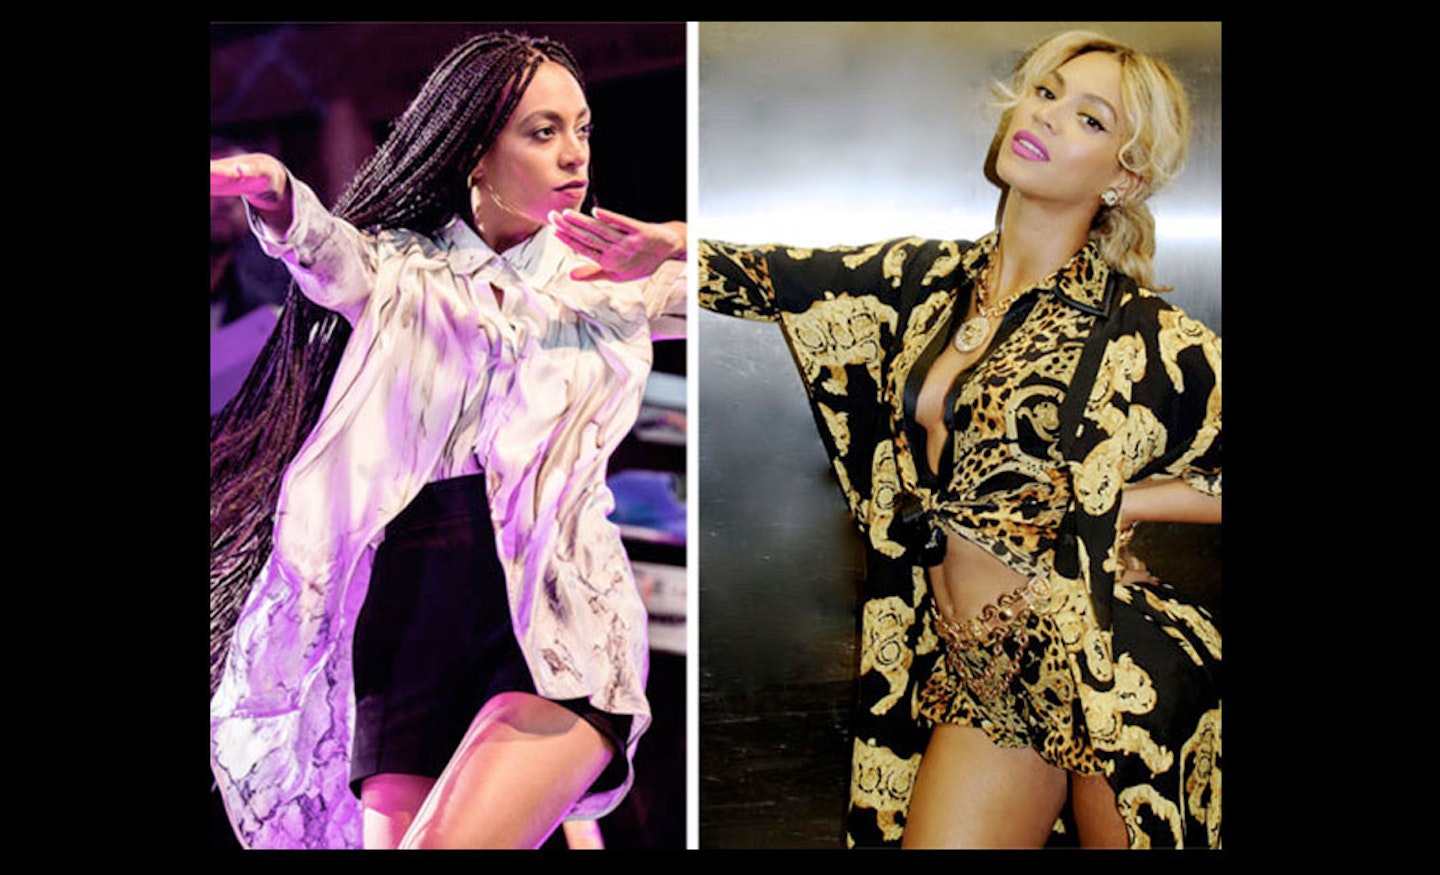 It's silk shirts ahoy! Bey and Solange strike a pose in a jazzy button-through.